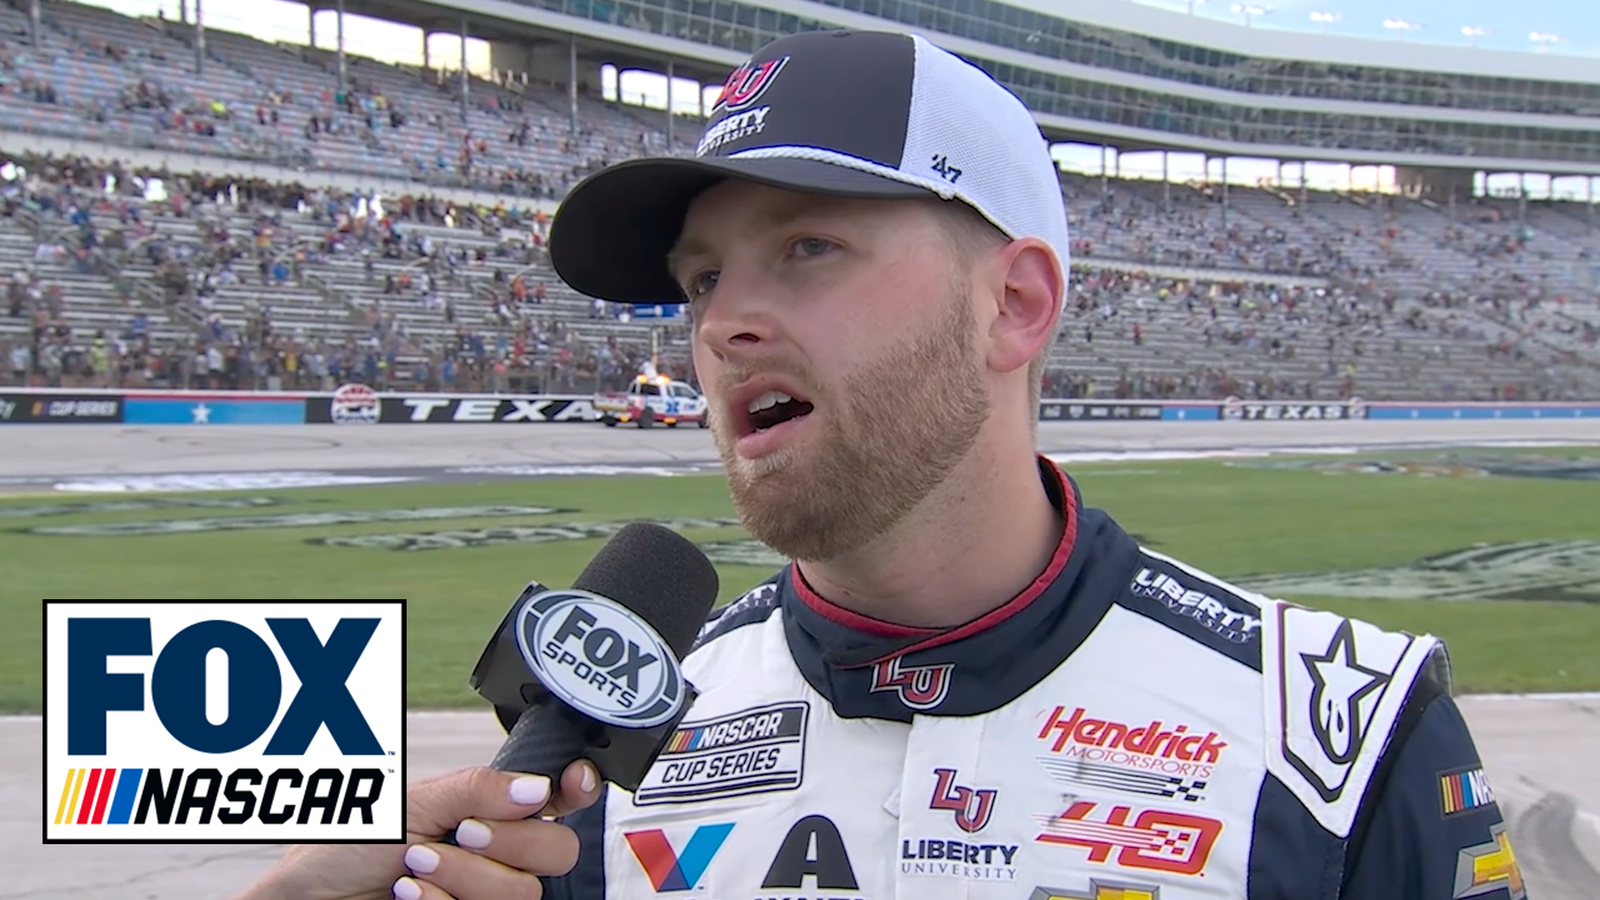 William Byron discusses the wild finish and making contact with Ross Chastain at Texas Motor Speedway